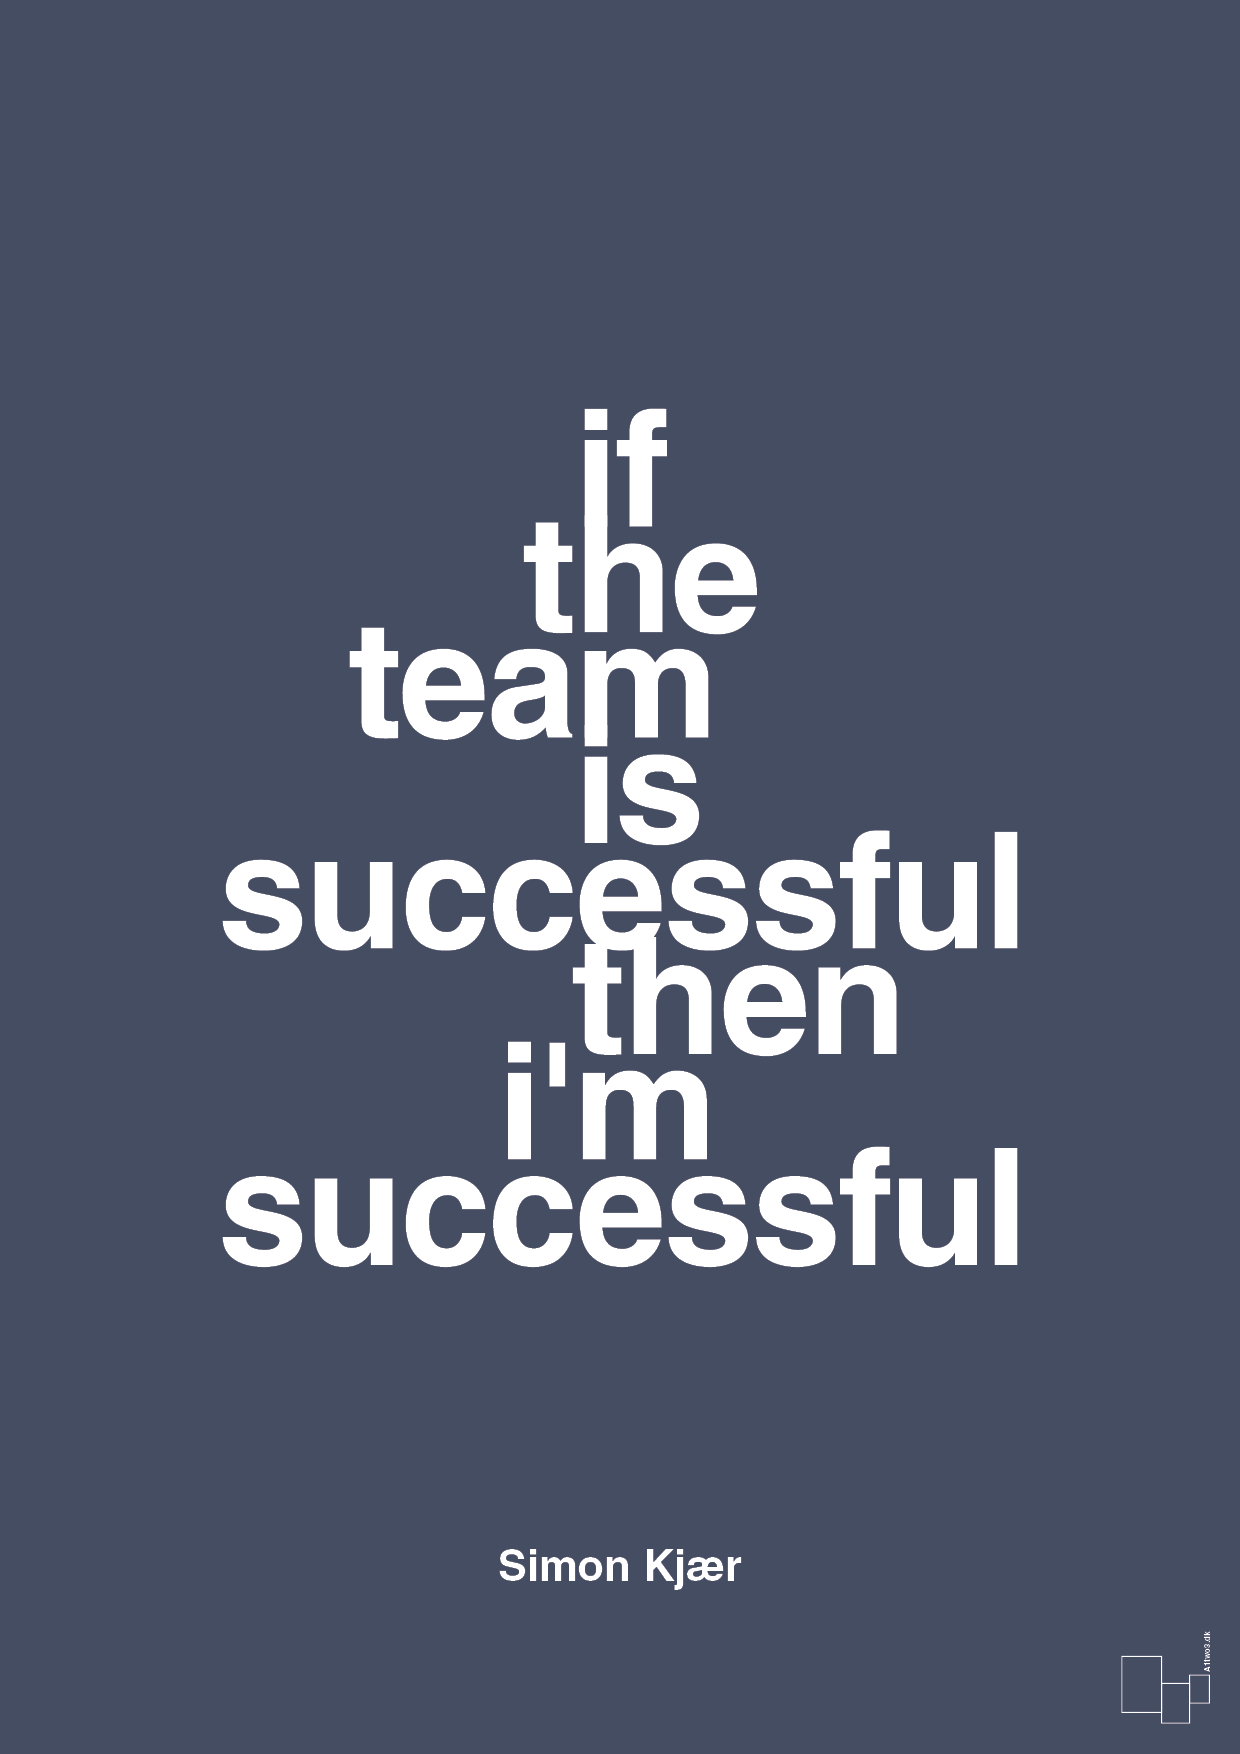 if the team is successful then i'm successful - Plakat med Citater i Petrol